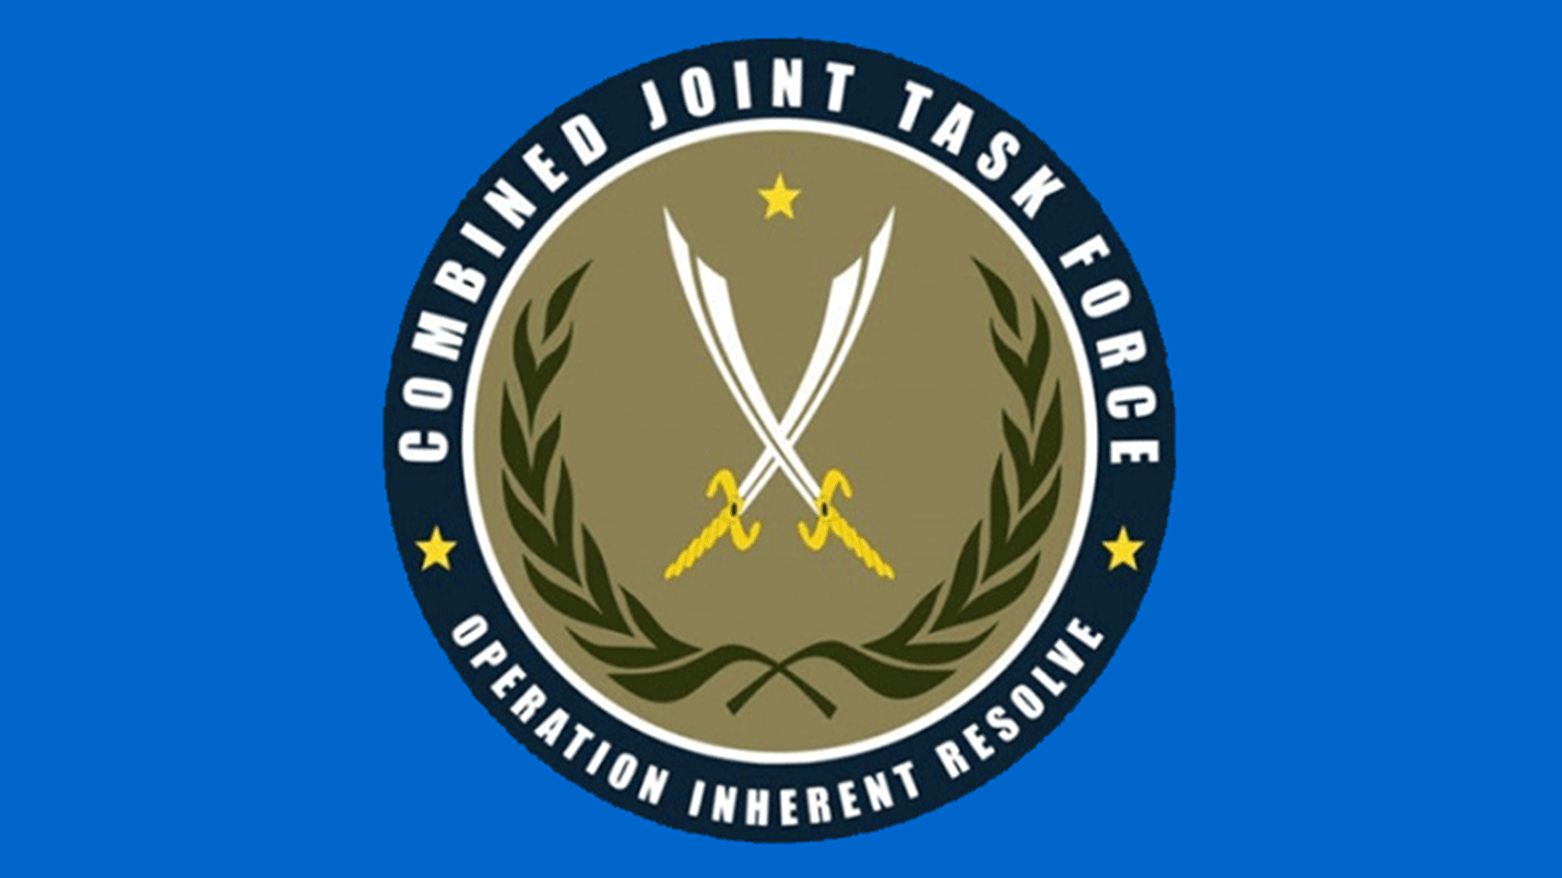 The logo of Combined Joint Task Force – Operation Inherent Resolve. (Photo: Combined Joint Task Force – Operation Inherent Resolve)